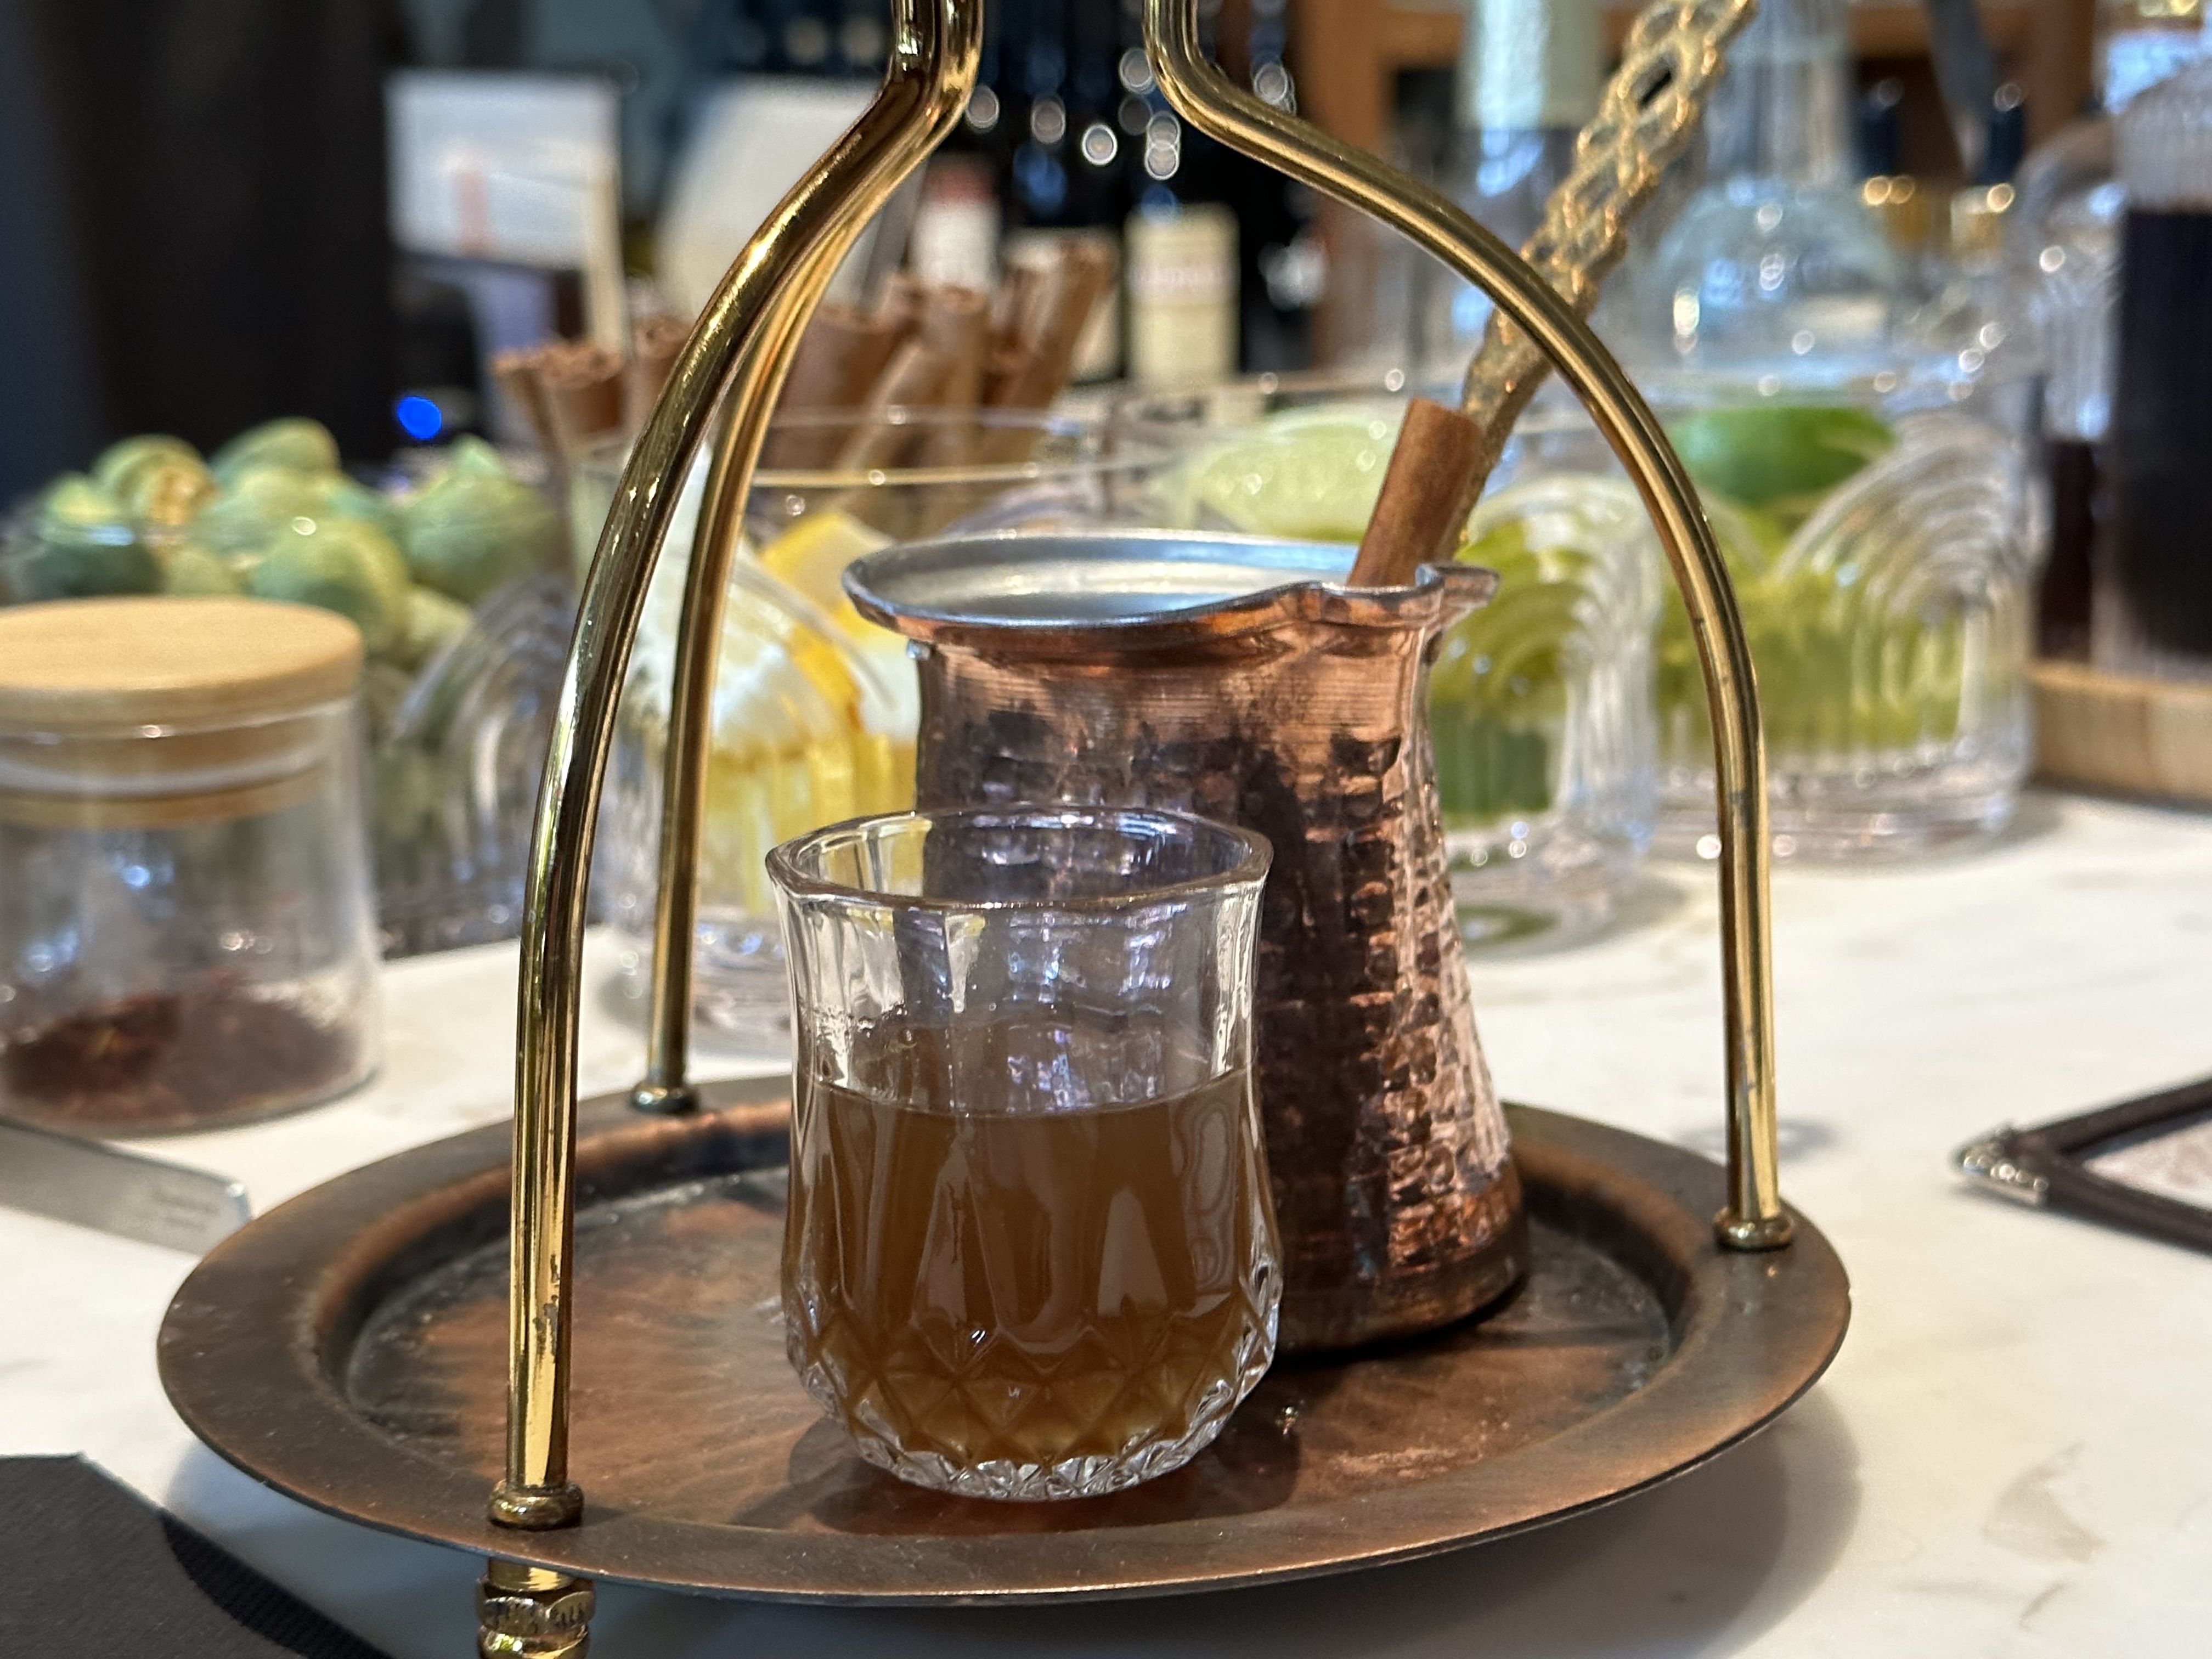 “Rakomelo for 2” has tsipouro, Greek forest honey, cinnamon, clove and lemon, served hot. Photo: Steph Solis/Axios